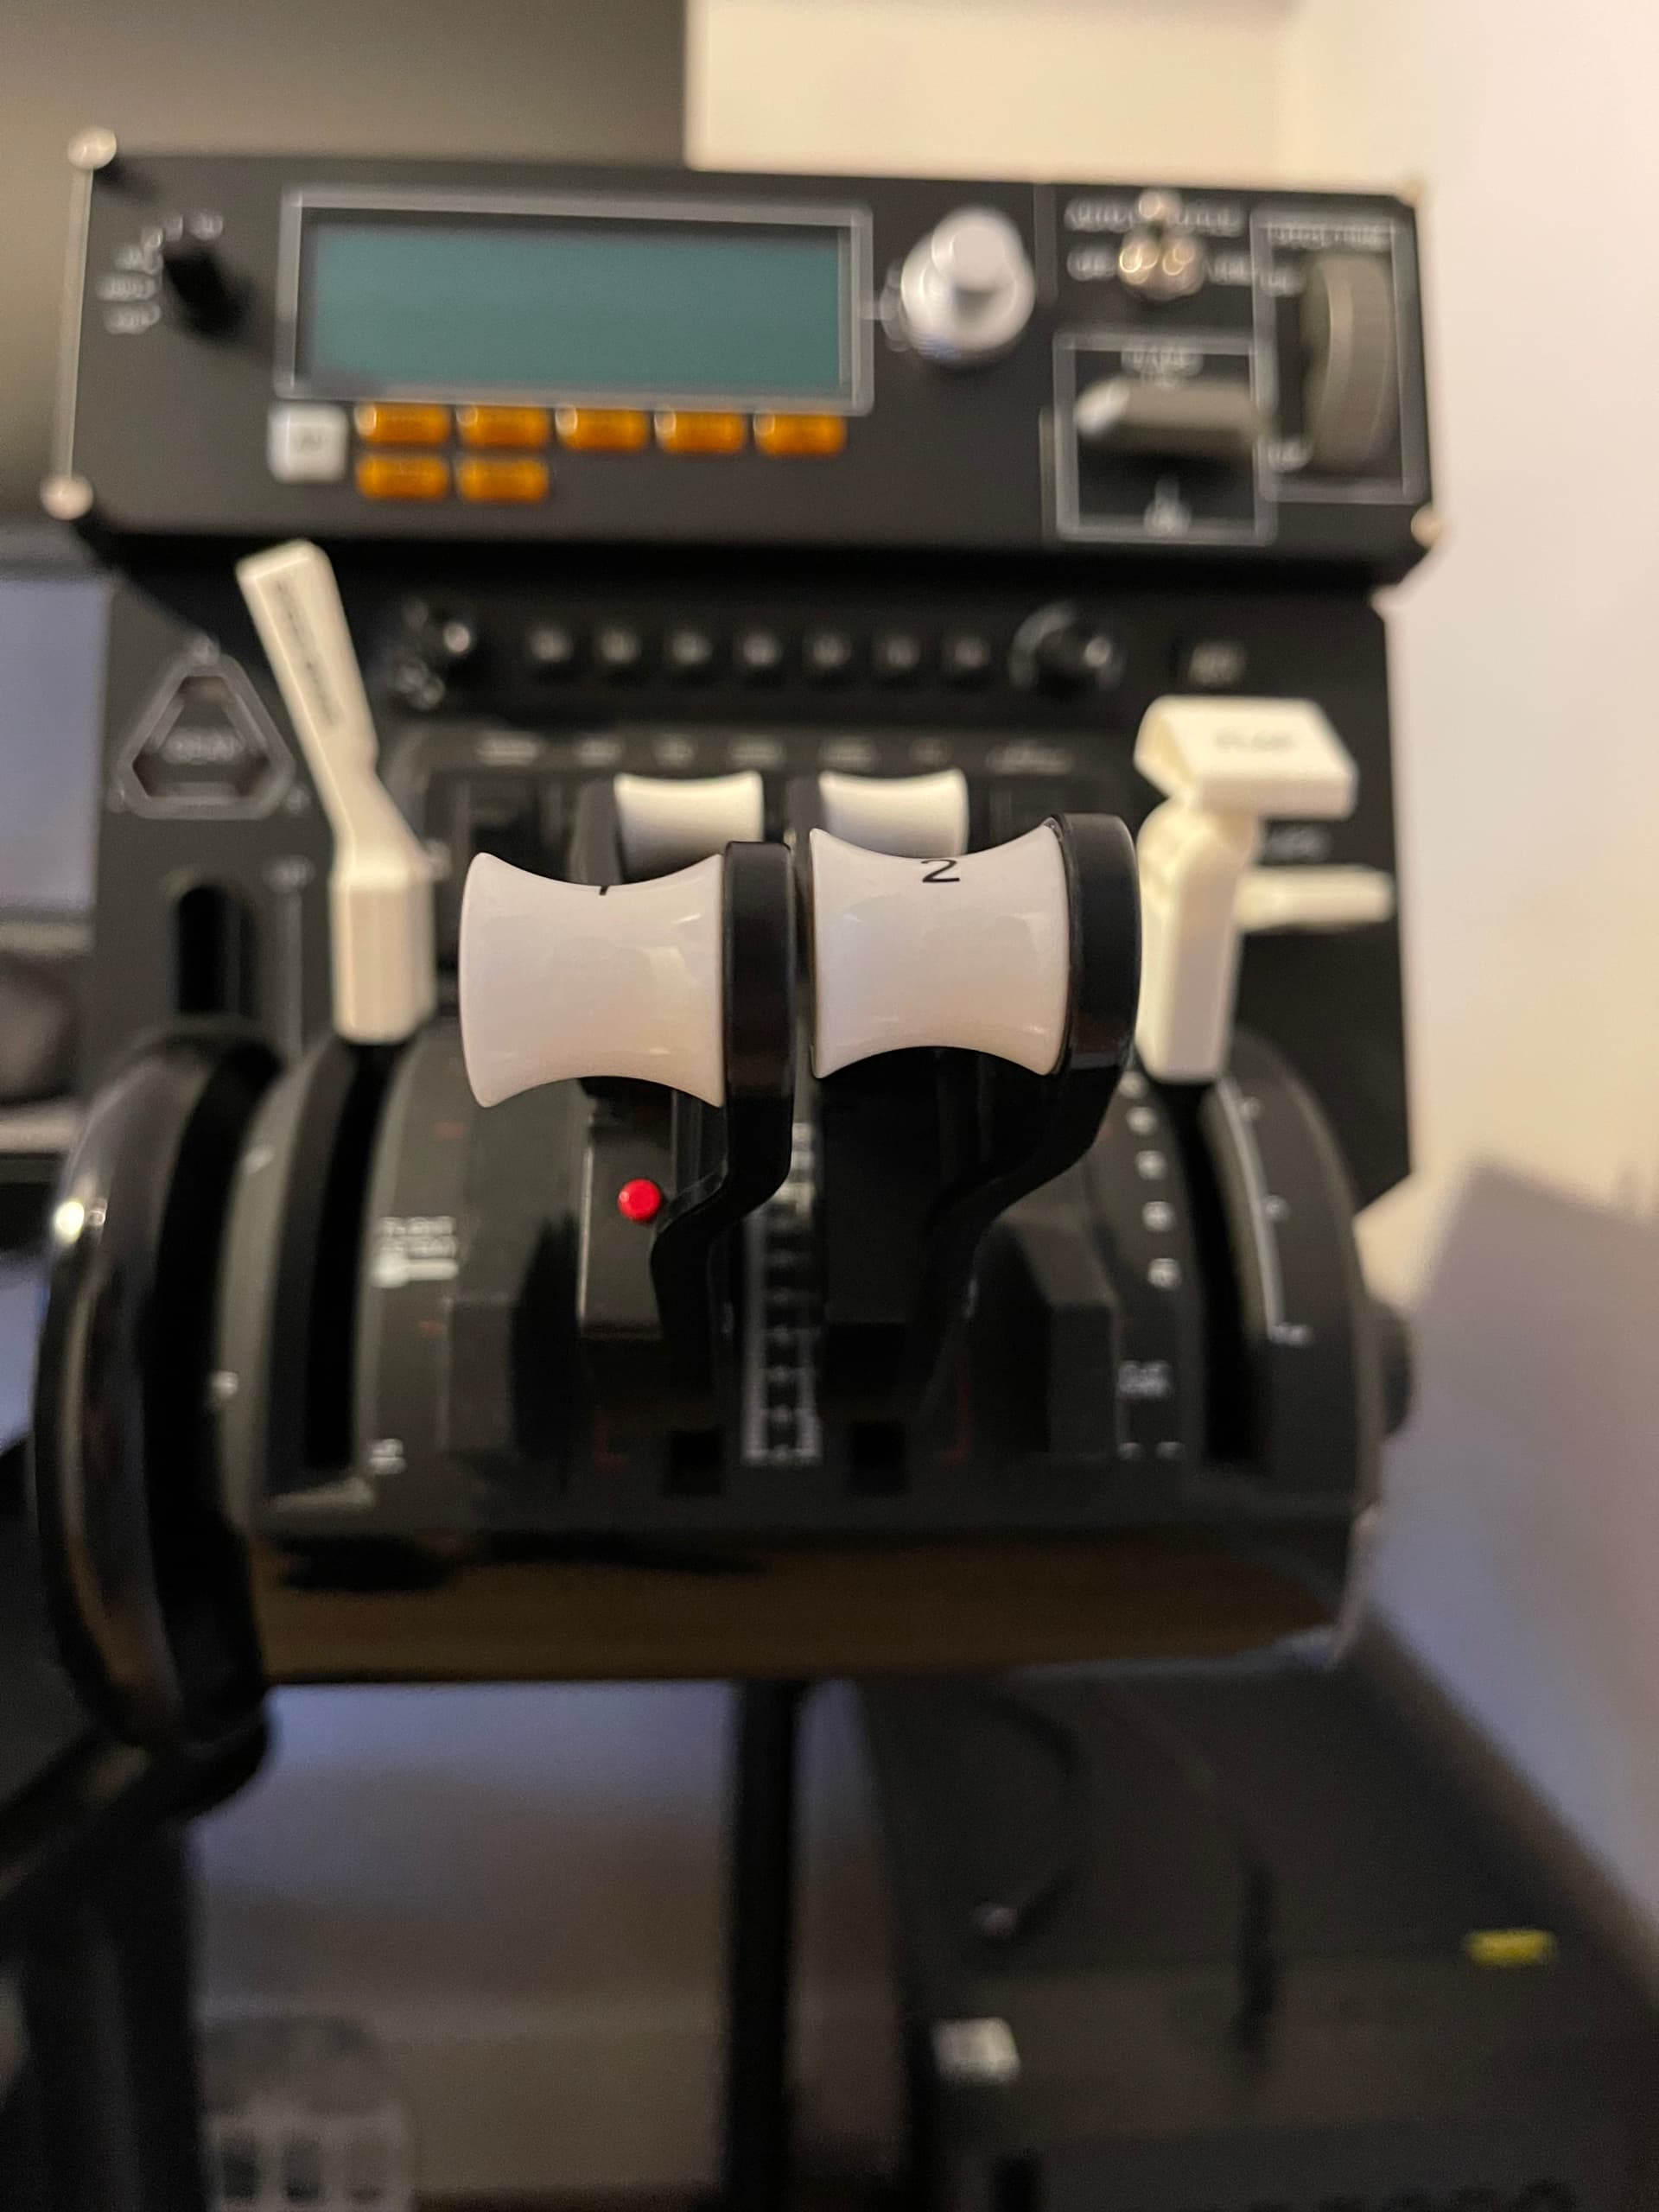 New Honeycomb Bravo Throttle, is this normal? The levers are not aligned  when pulled back before being in the reverse area. : r/flightsim